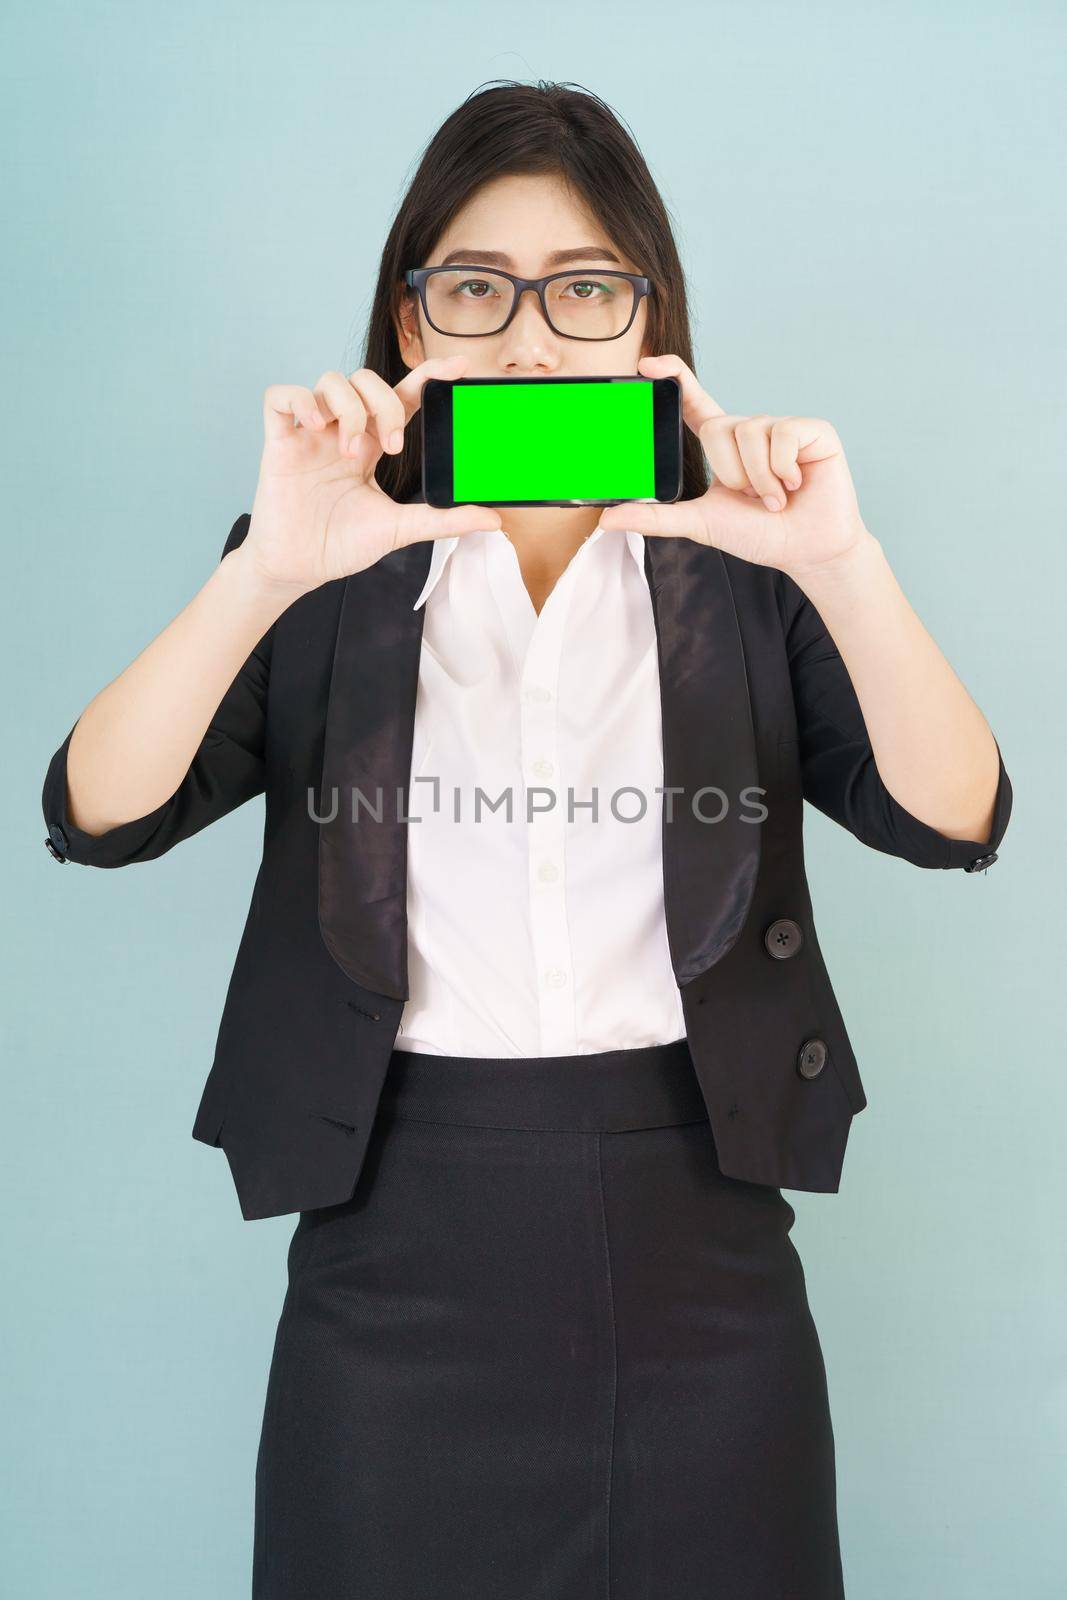 Young women in suit holding her  smartphone mock up green screen standing against blue background